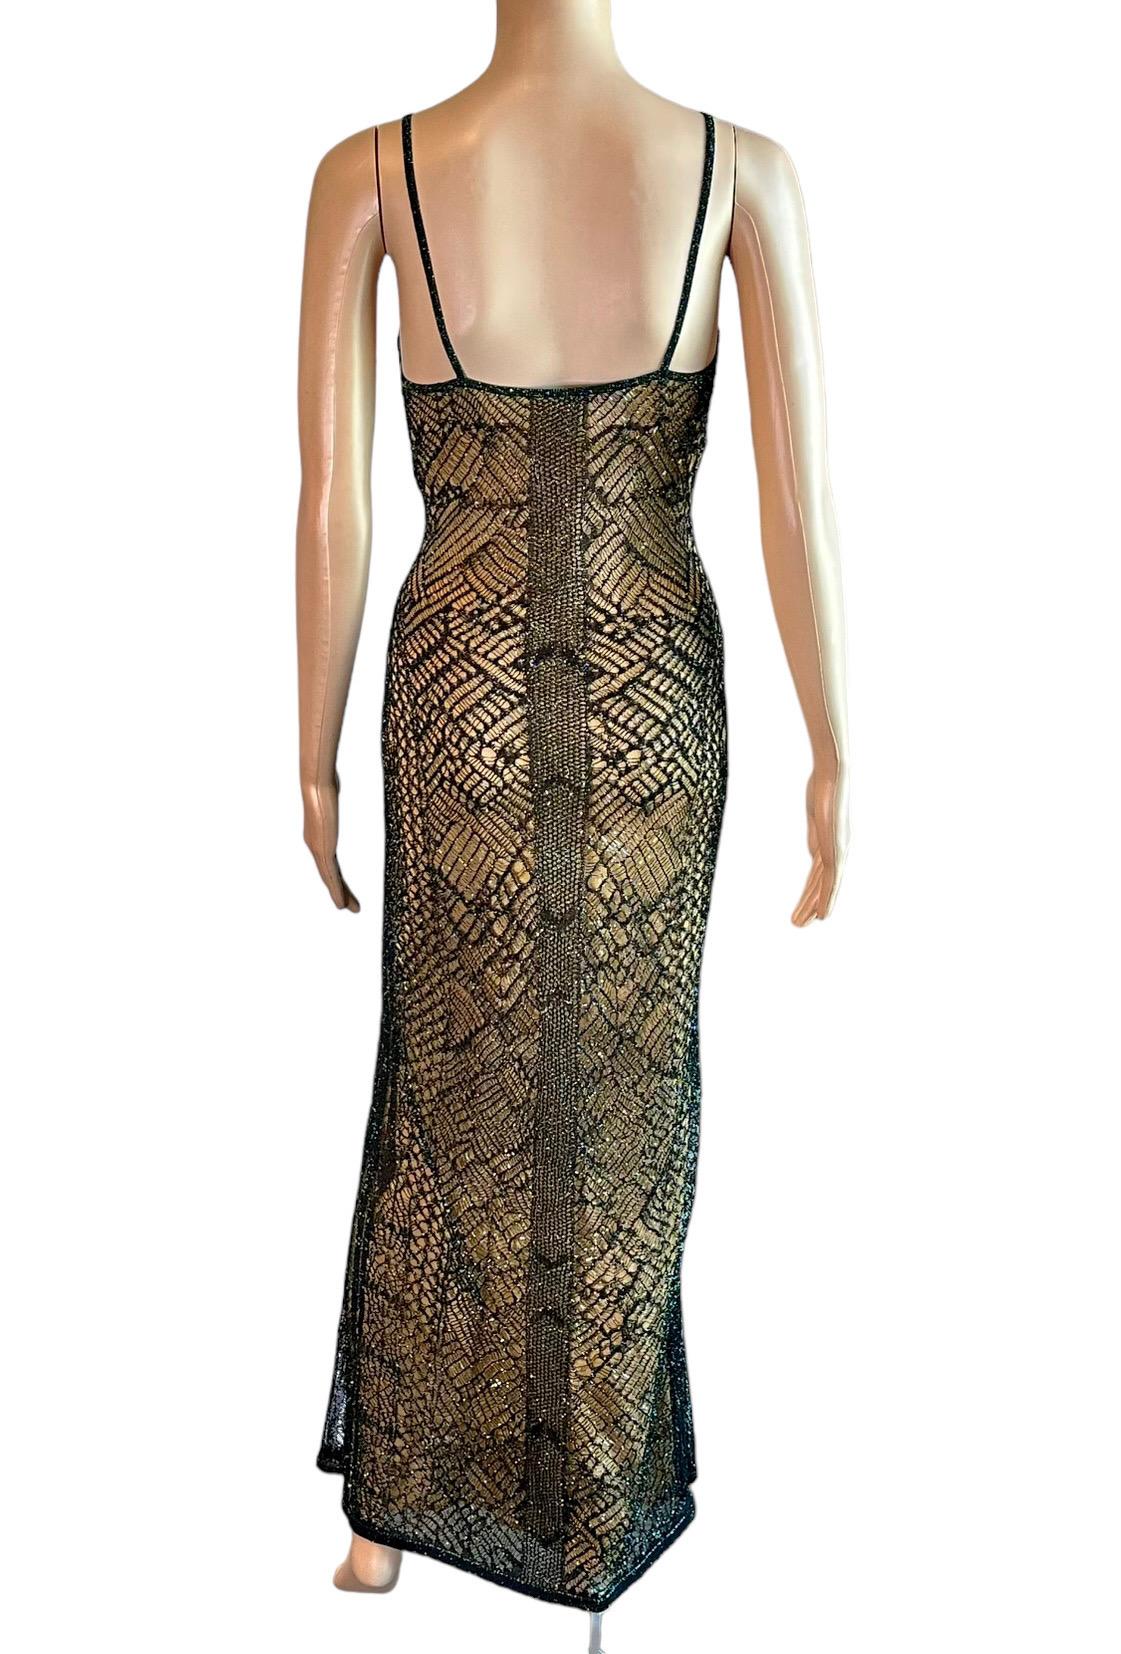 Thierry Mugler Couture Vintage Semi-Sheer Open Knit Crochet Maxi Evening Dress  For Sale 1